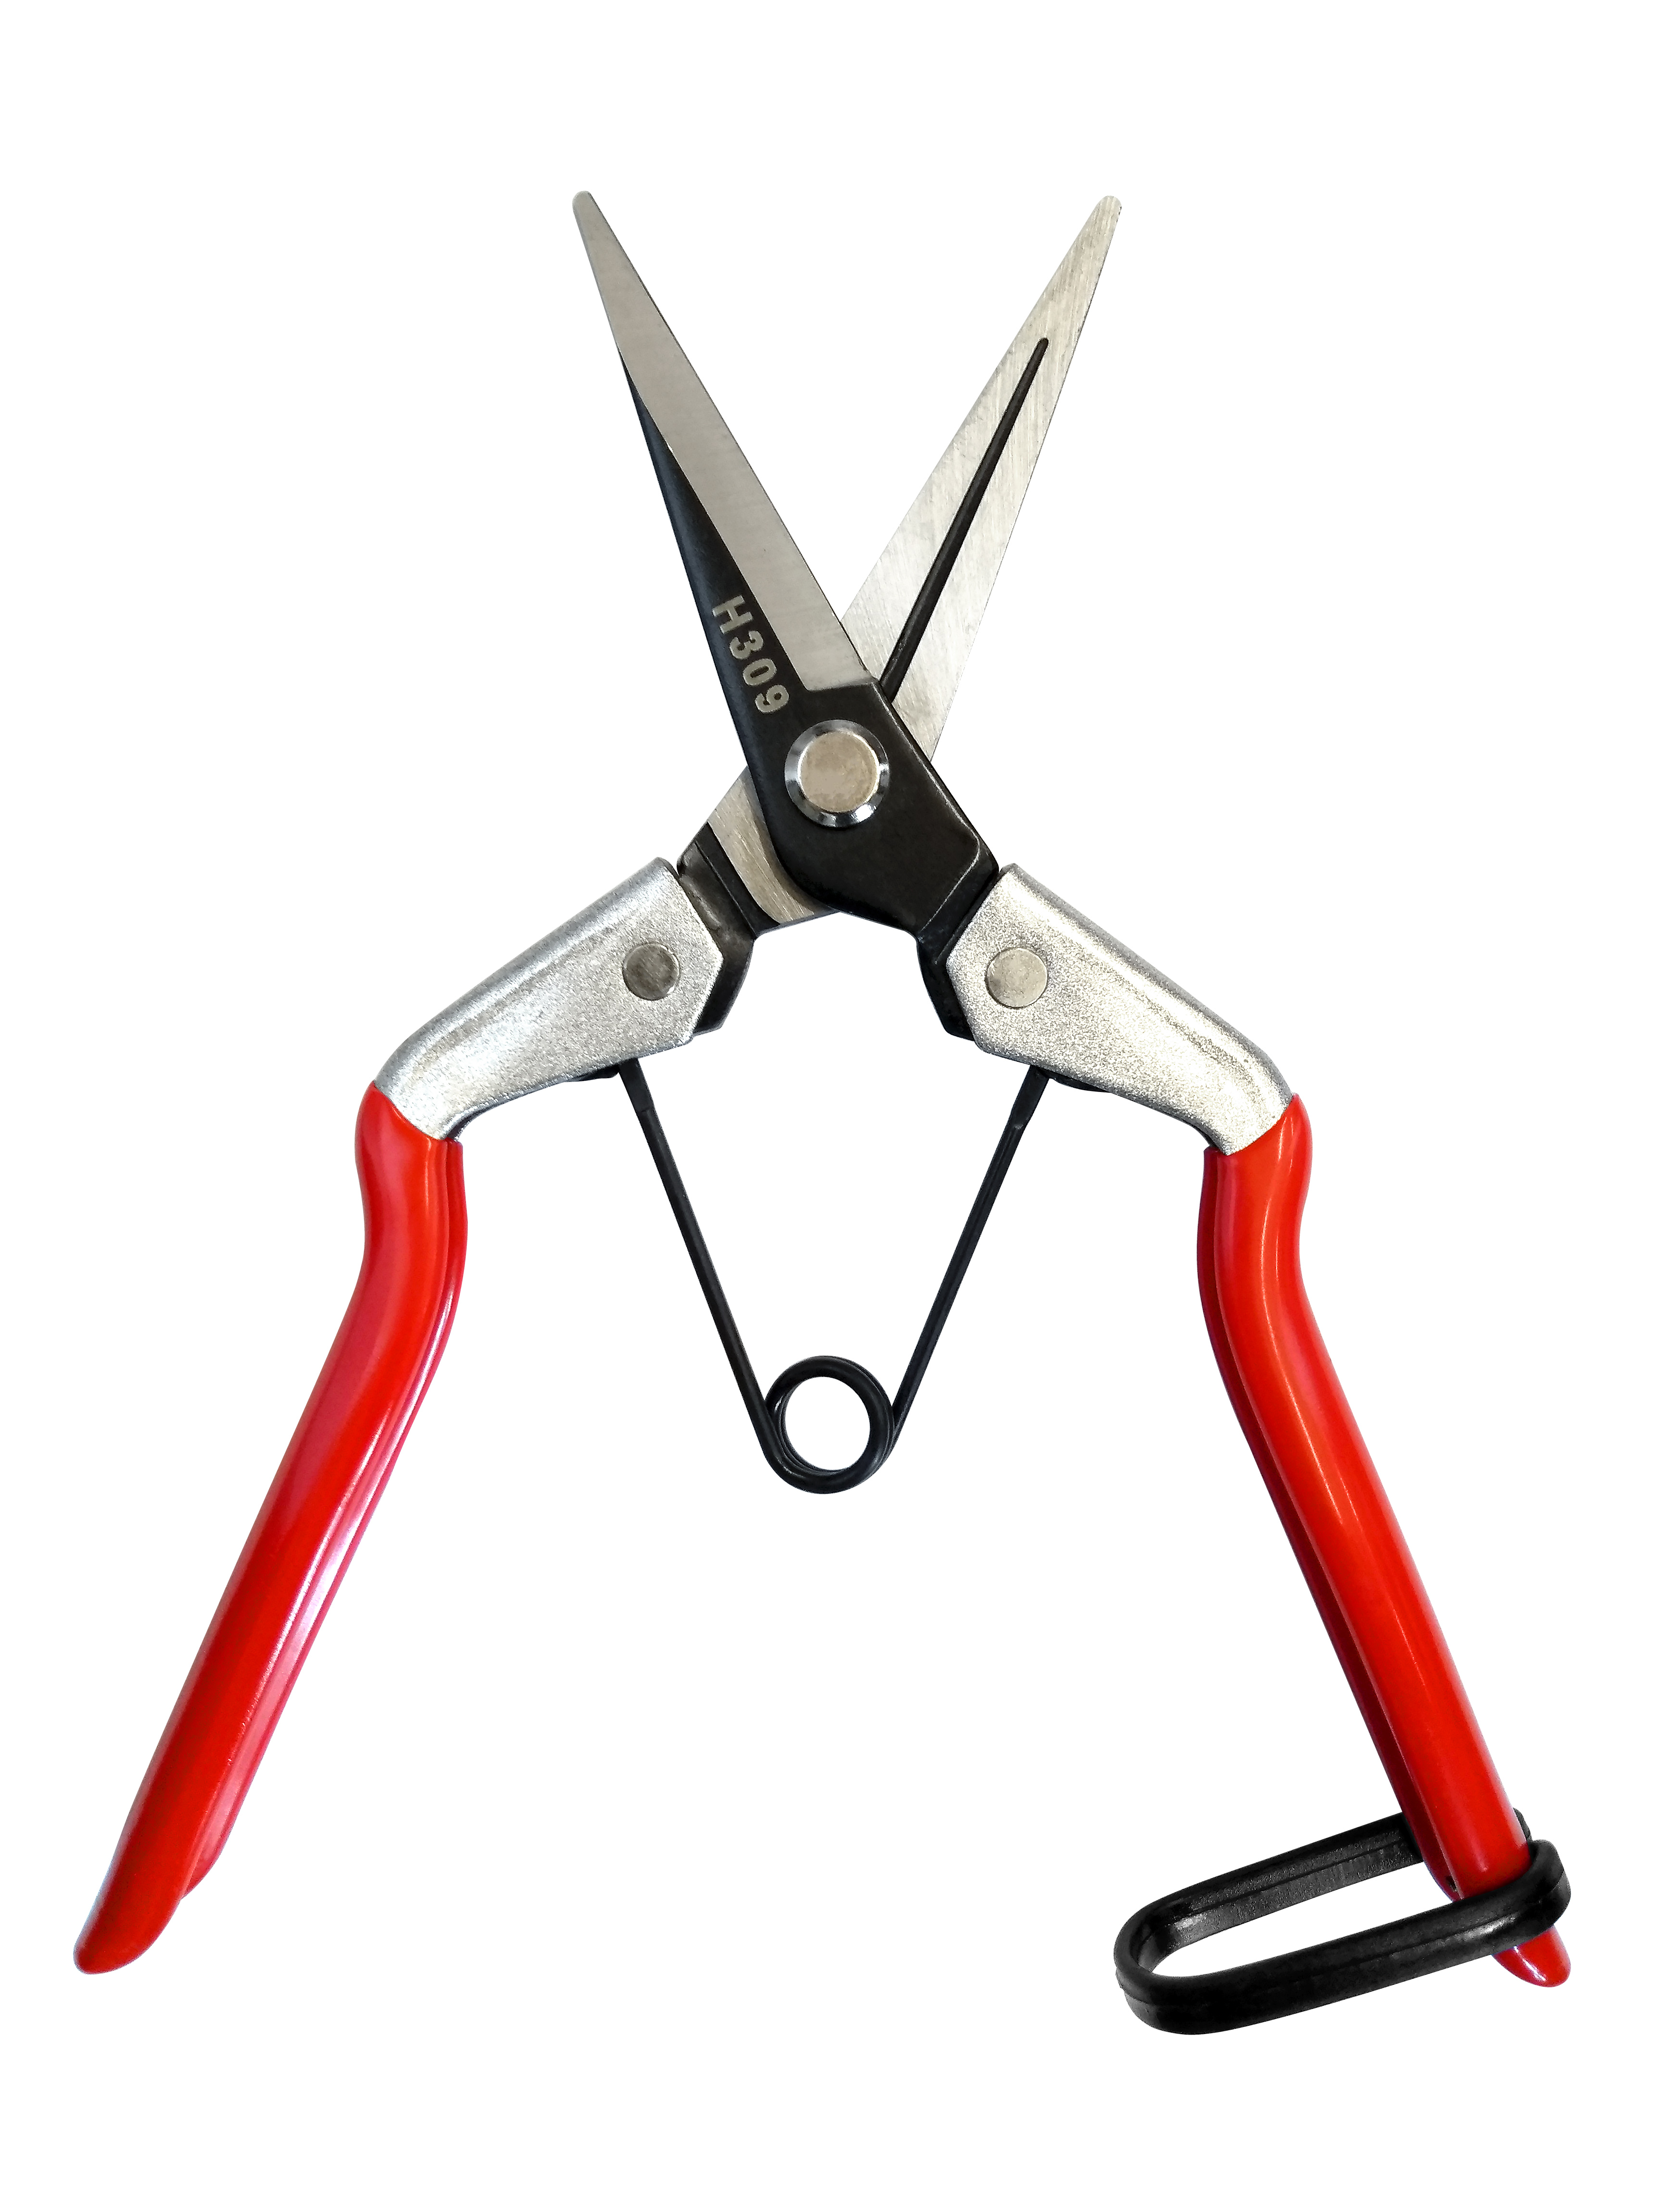 Zenport Shears H309 Deluxe Thinning Shear 7-Inch Long with Wishbone Spring